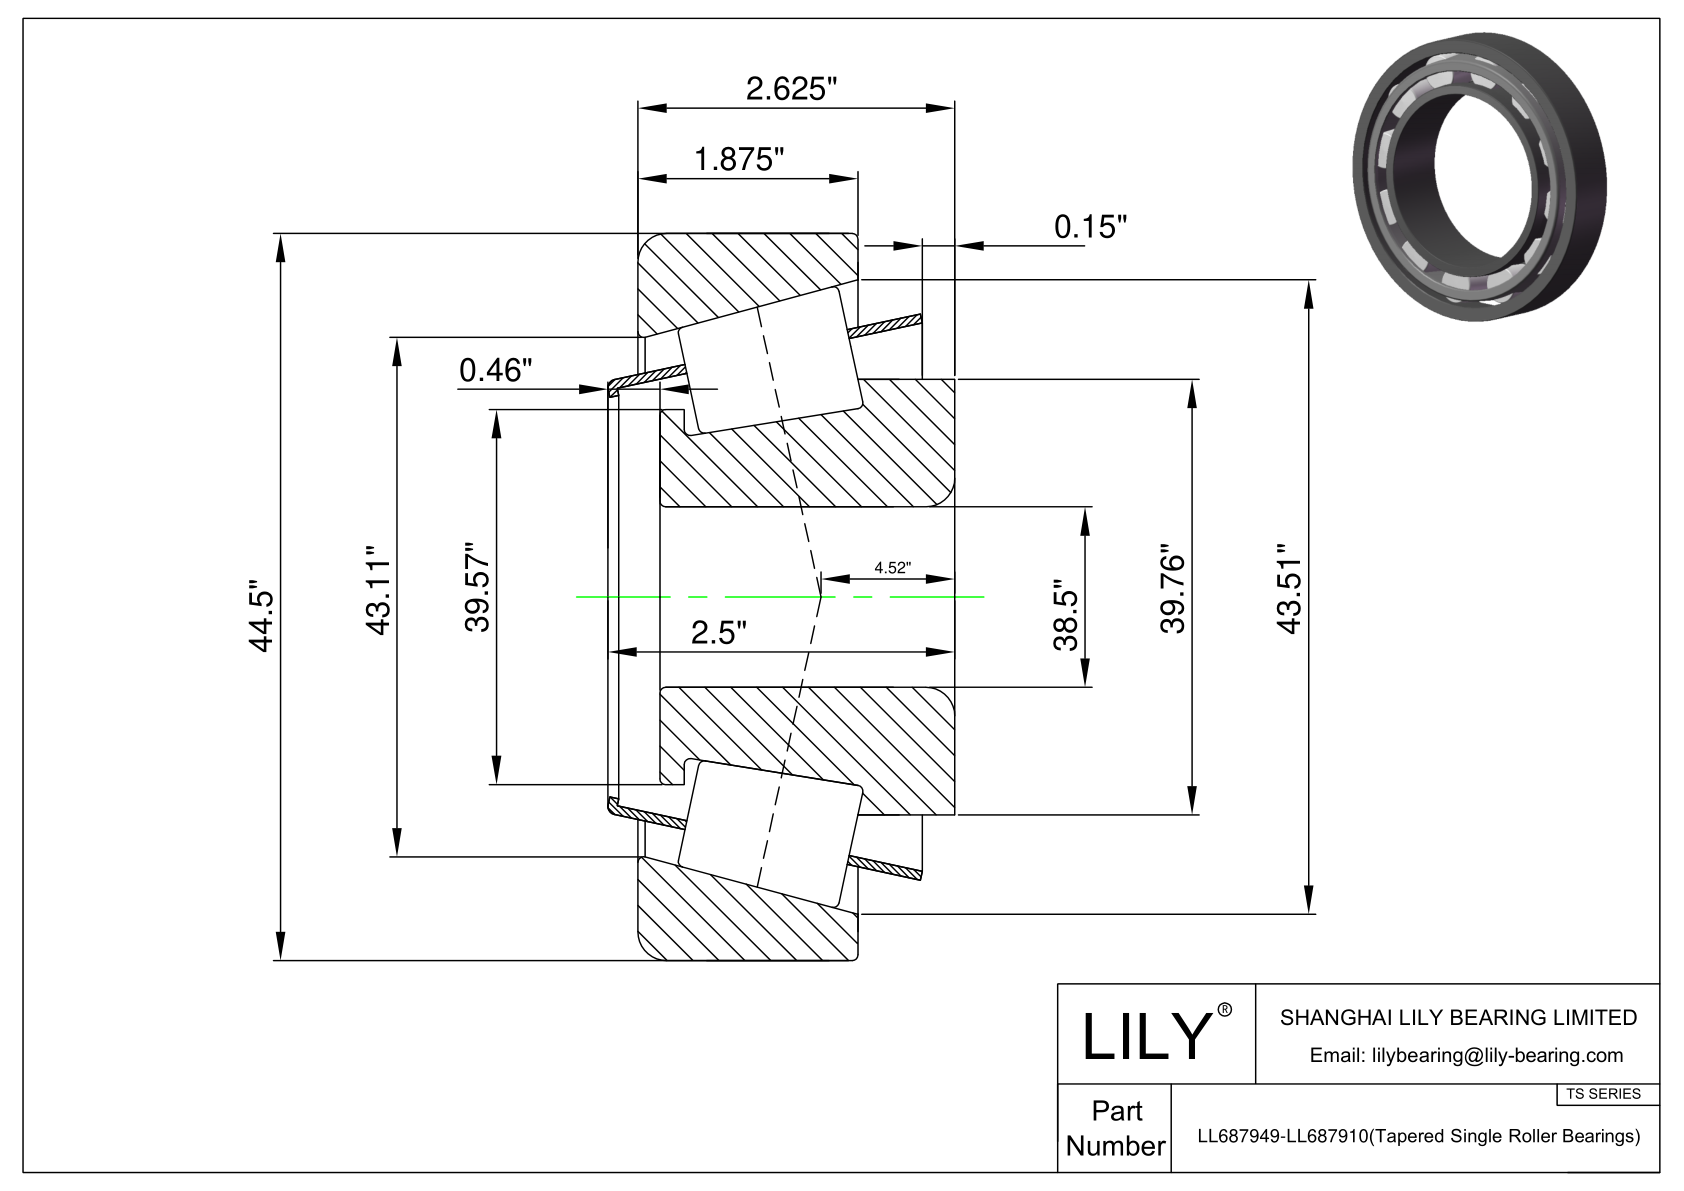 LL687949-LL687910 TS (Tapered Single Roller Bearings) (Imperial) cad drawing